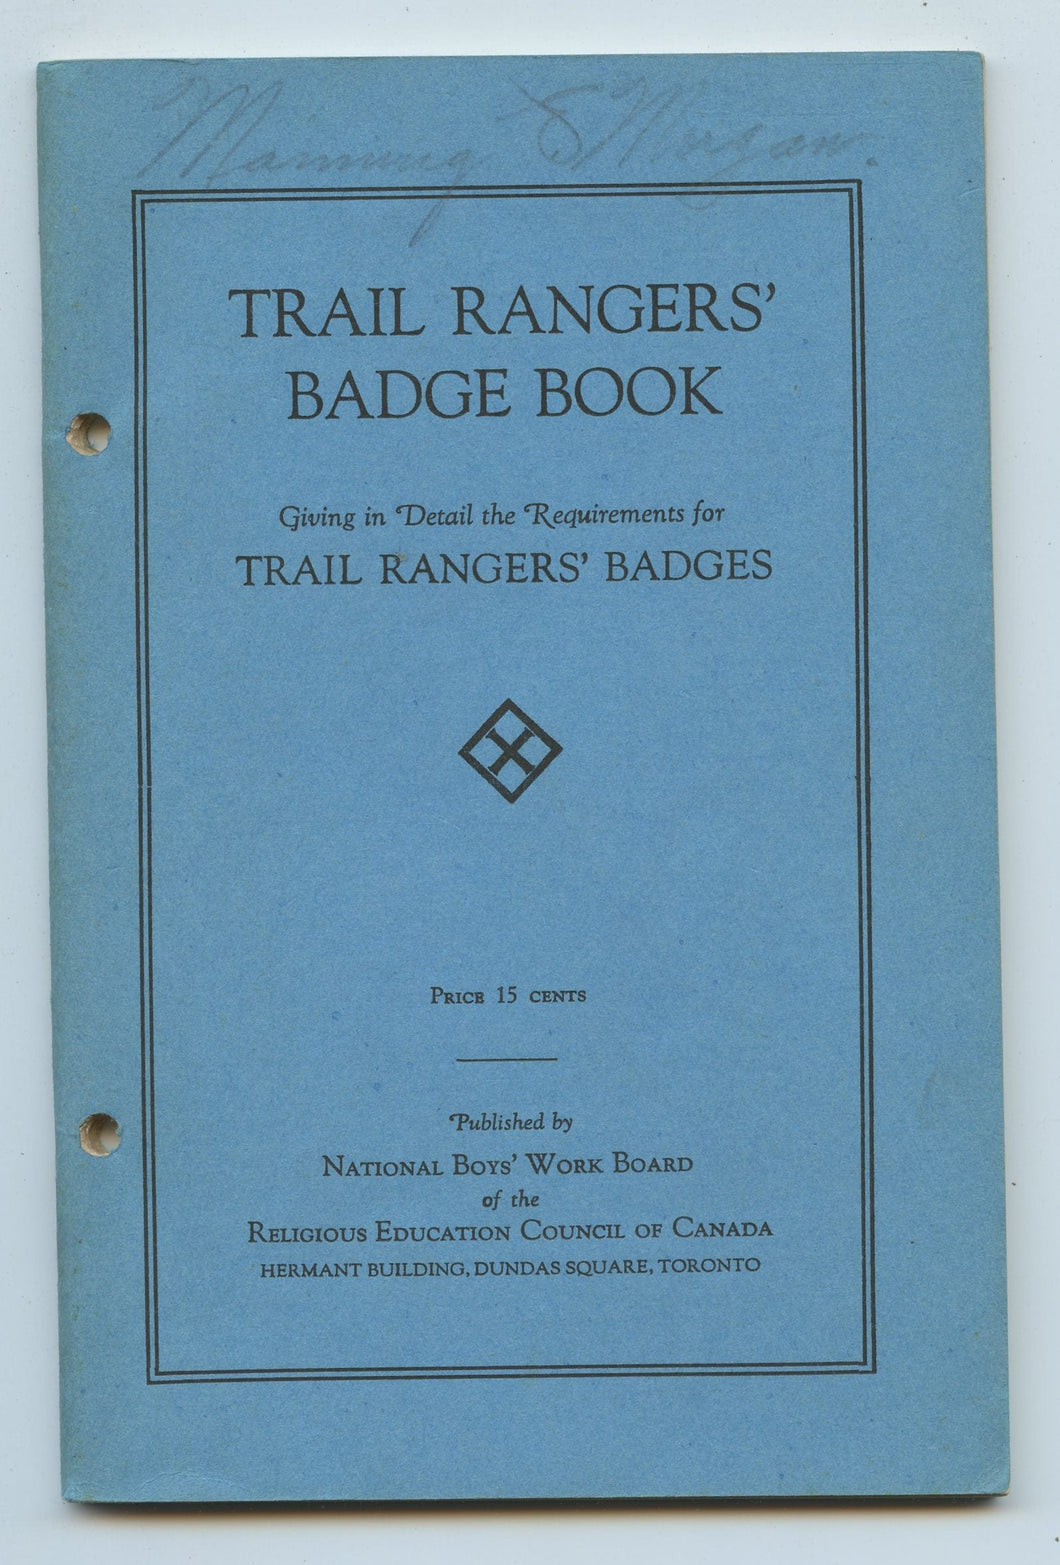 Trail Rangers' Badge Book: Giving in Detail the Requirements for Trail Rangers' Badges